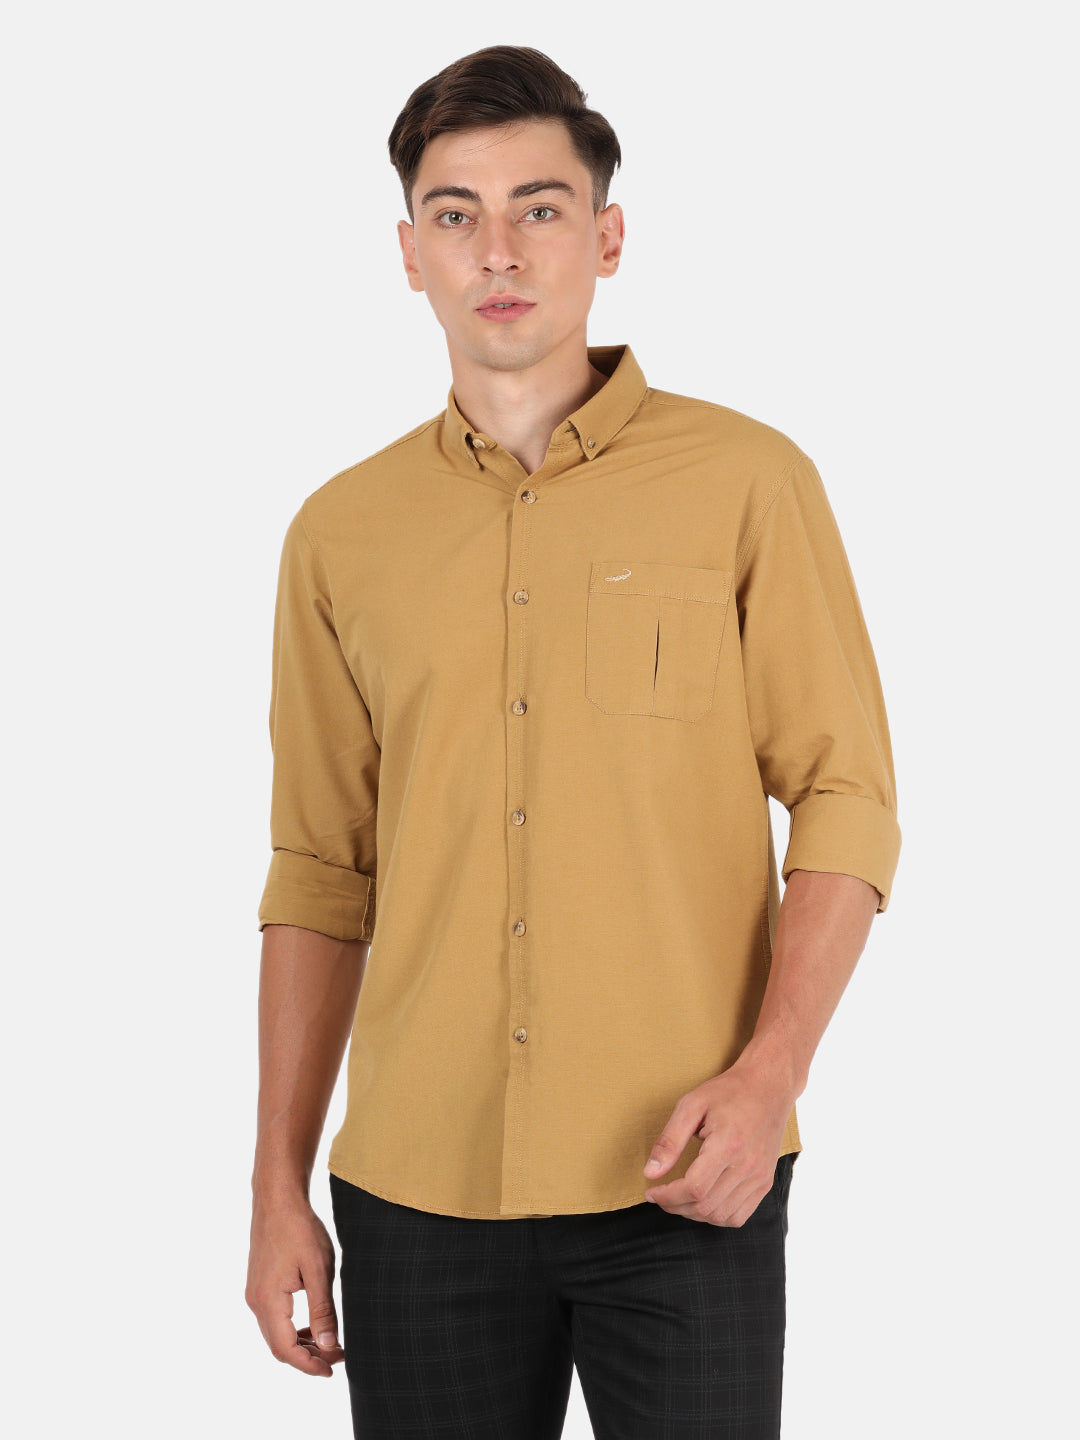 Casual Full Sleeve Comfort Fit Solid Light Brown with Collar Shirt for Men